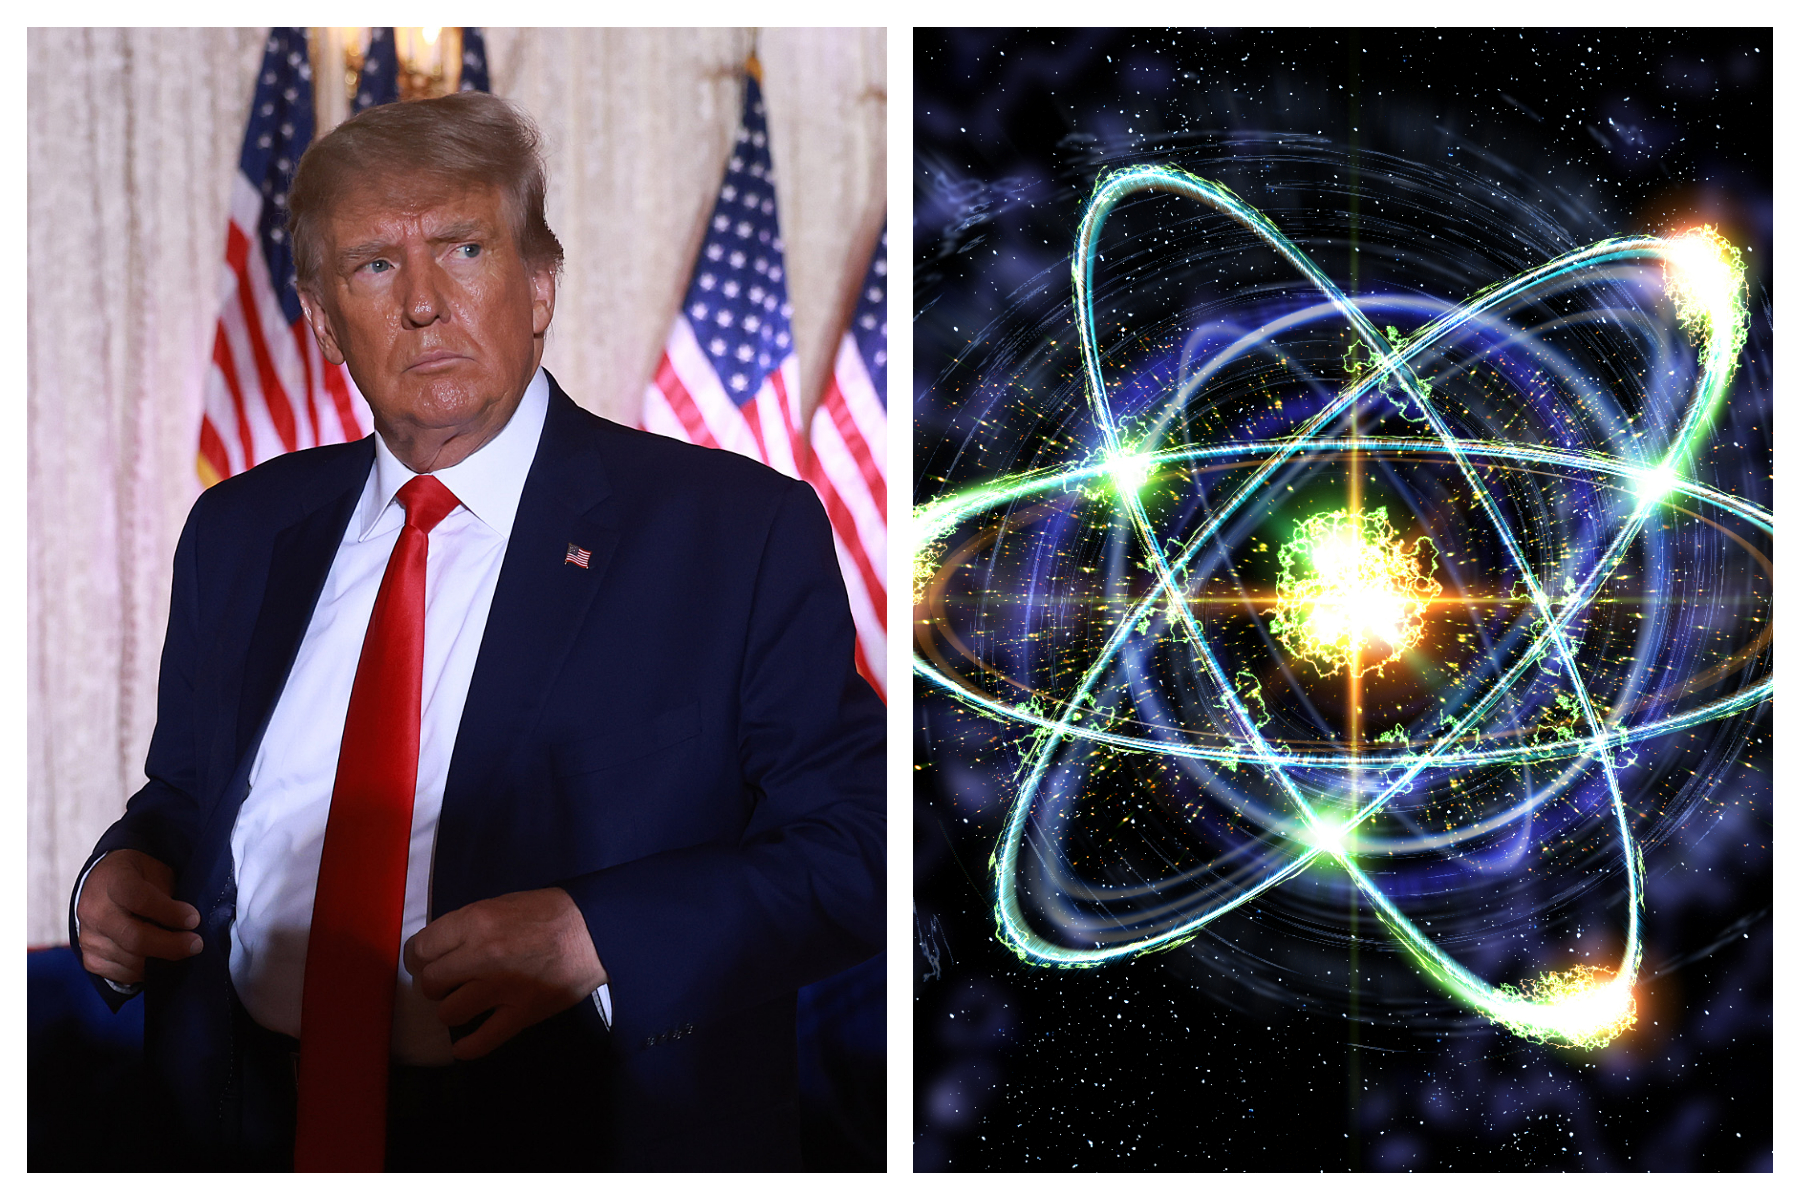 How Donald Trump pushed fusion energy forward as president